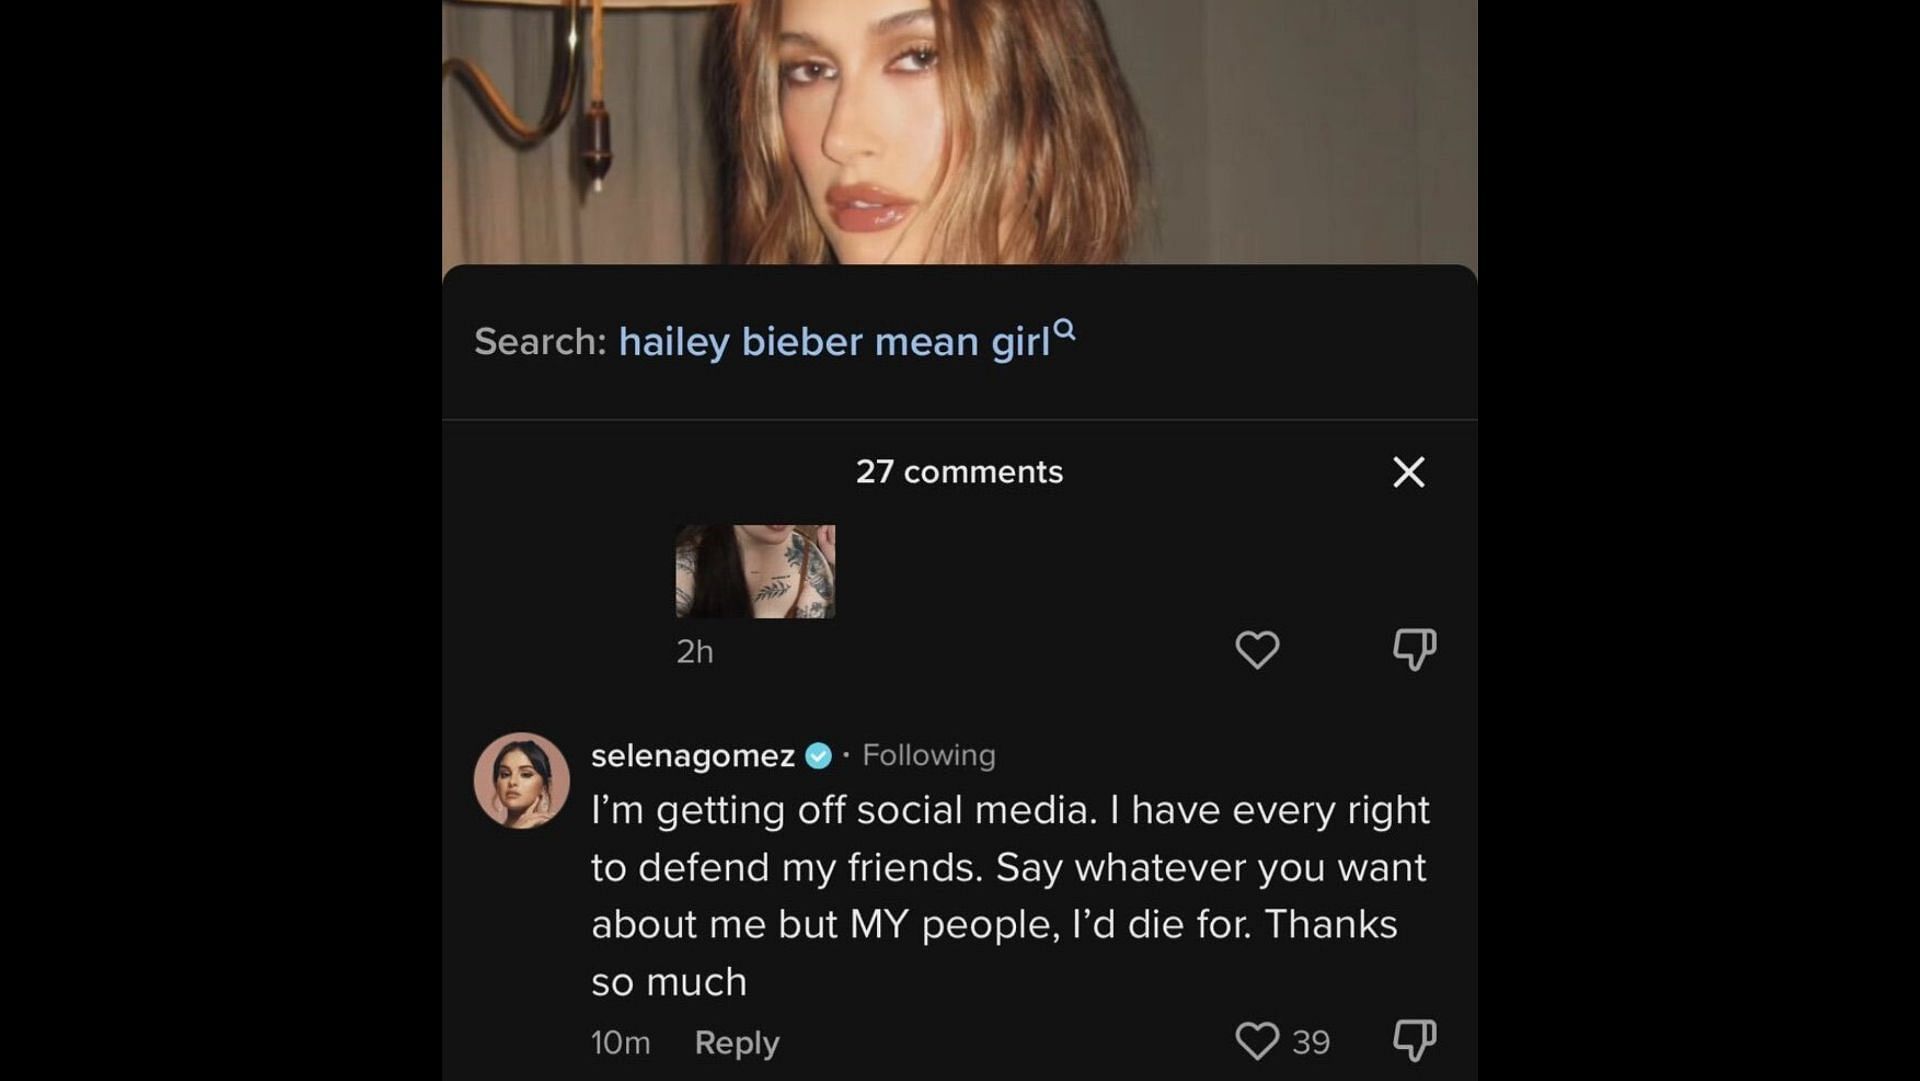 Screenshot of a comment made by Selena Gomez. (Image via @ghstofdrws/Twitter)